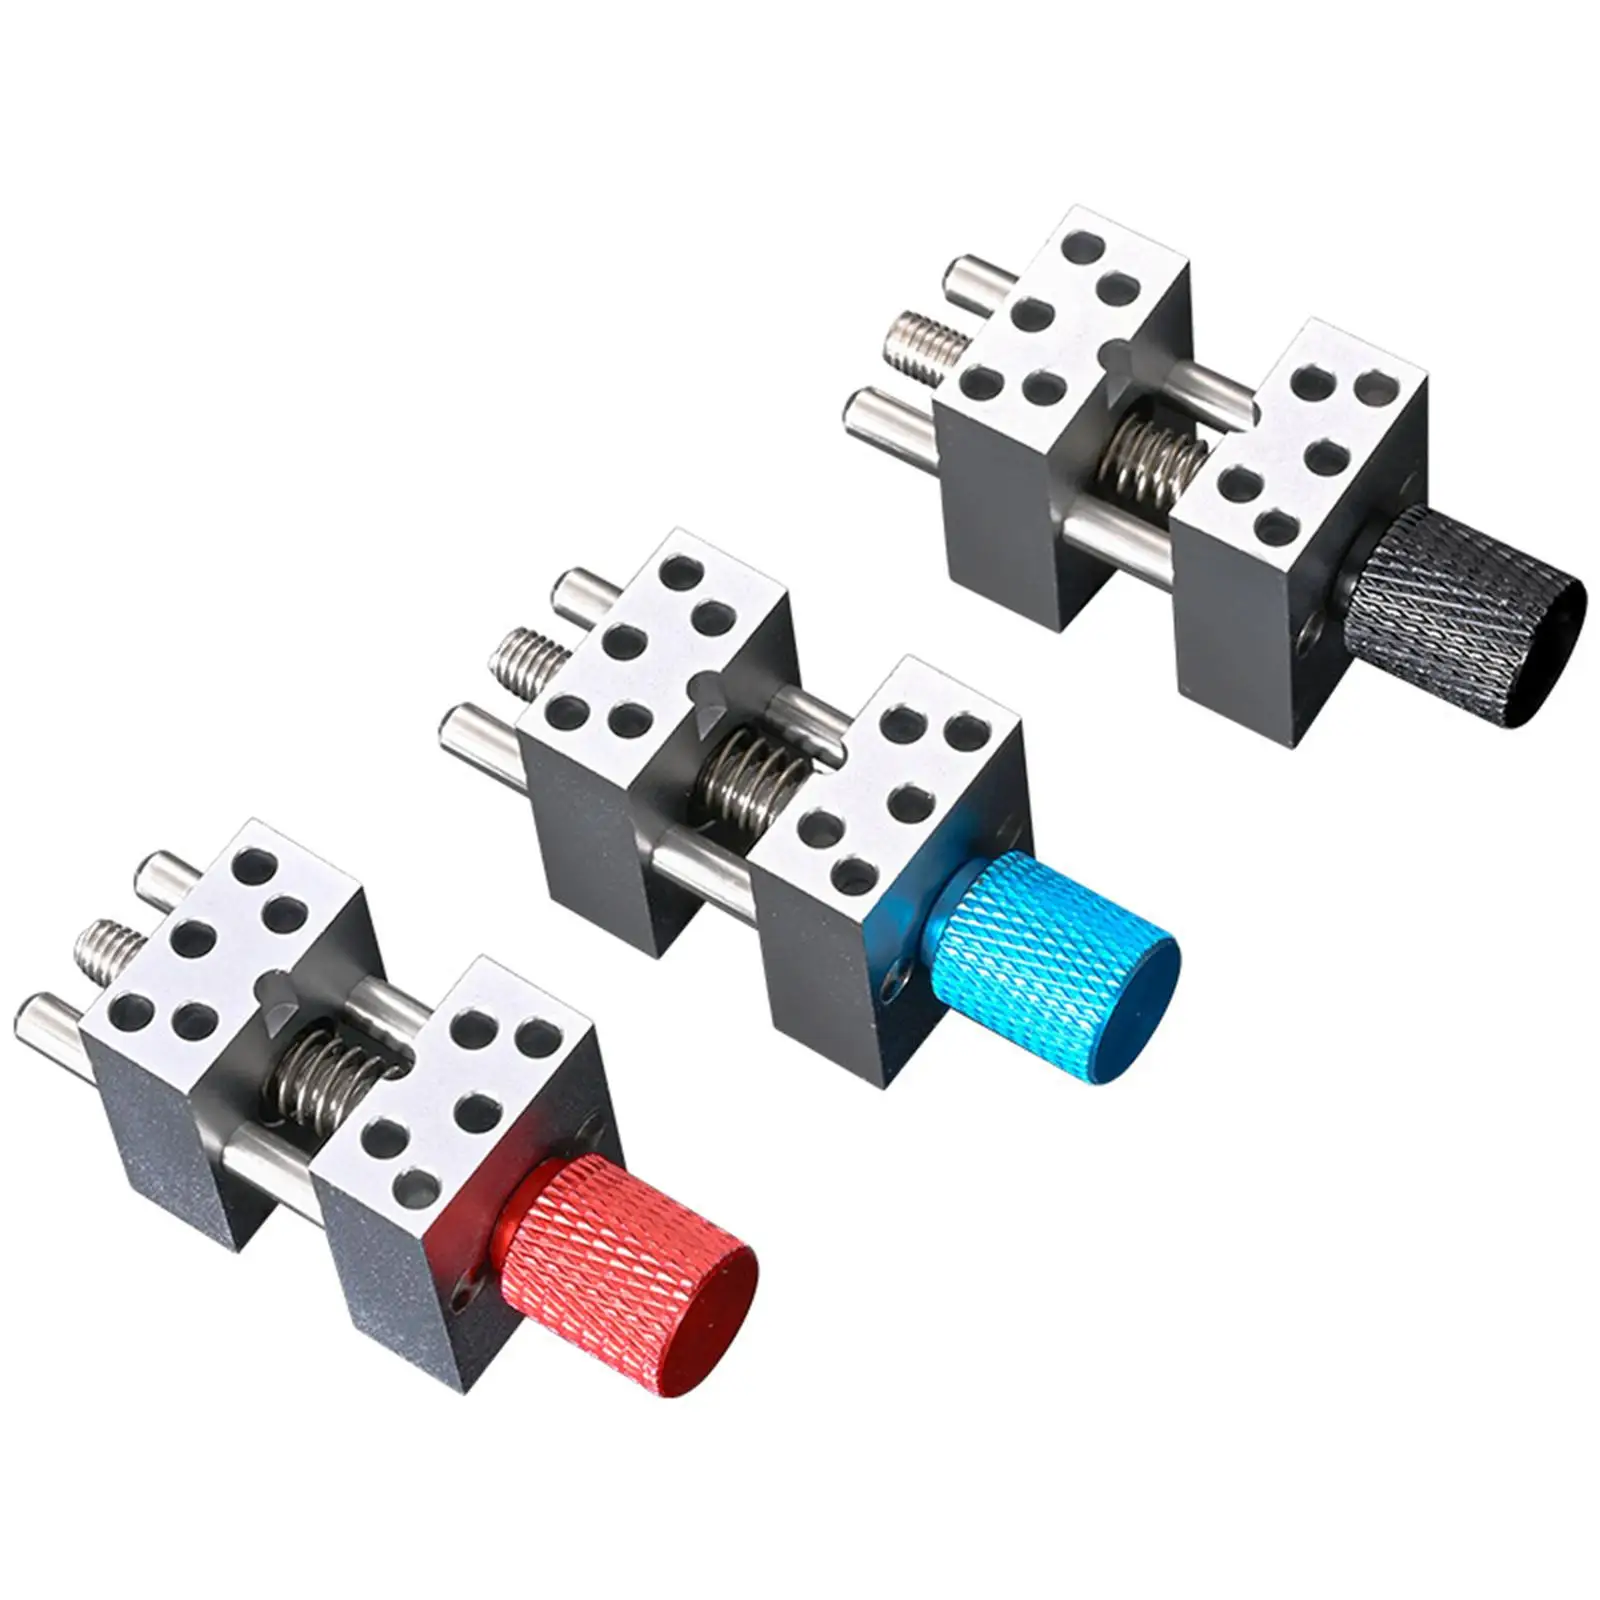 Mini Drill Press Vise Clamp Multifunctional for Model Parts Engraving Cutting Coloring Model Making DIY Sculpture Craft Carving